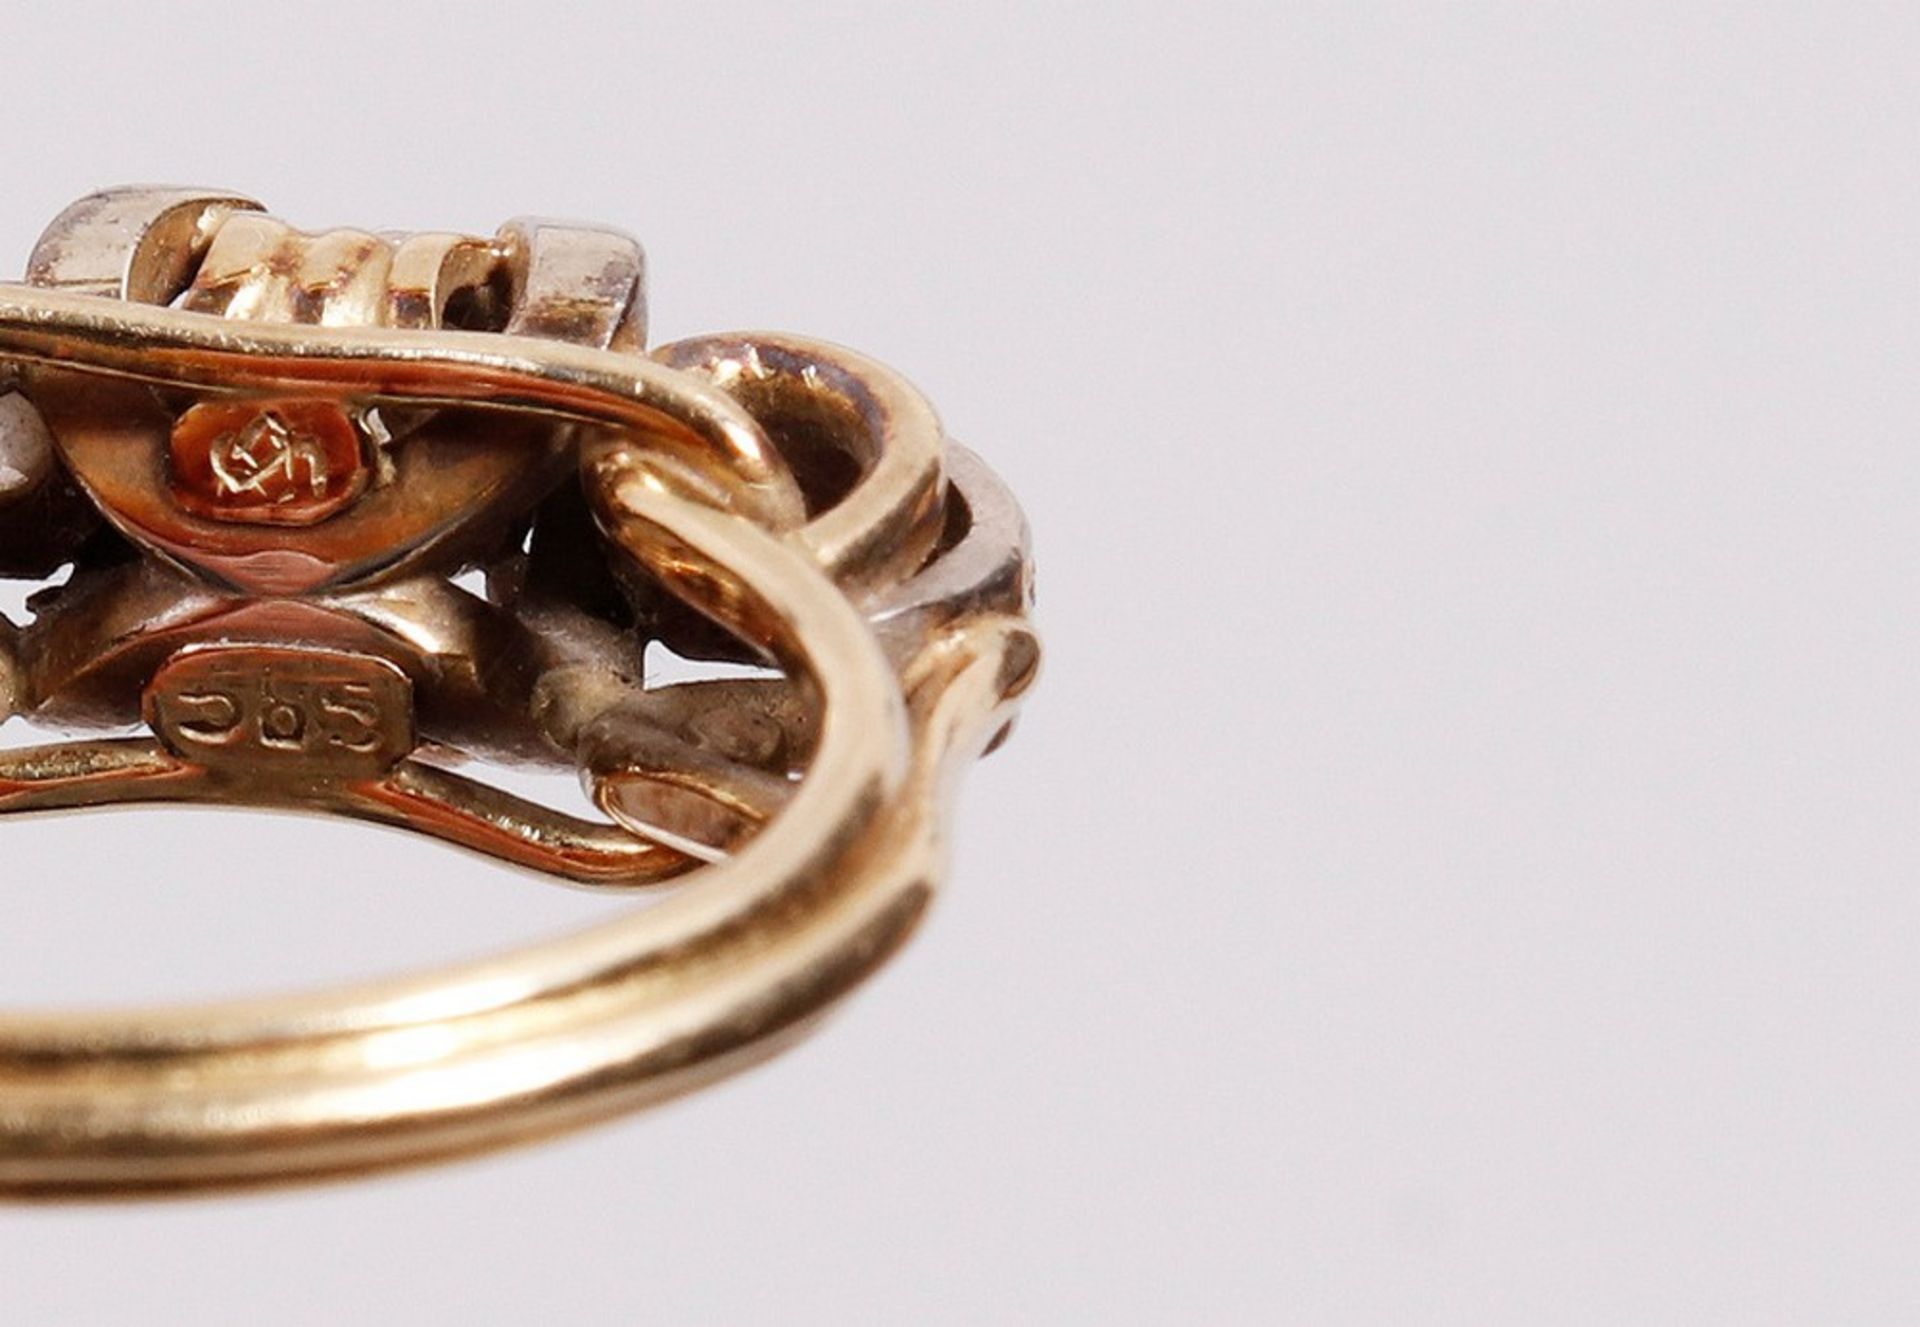 Art Deco ring, 585 gold, 1920s/30s - Image 4 of 4